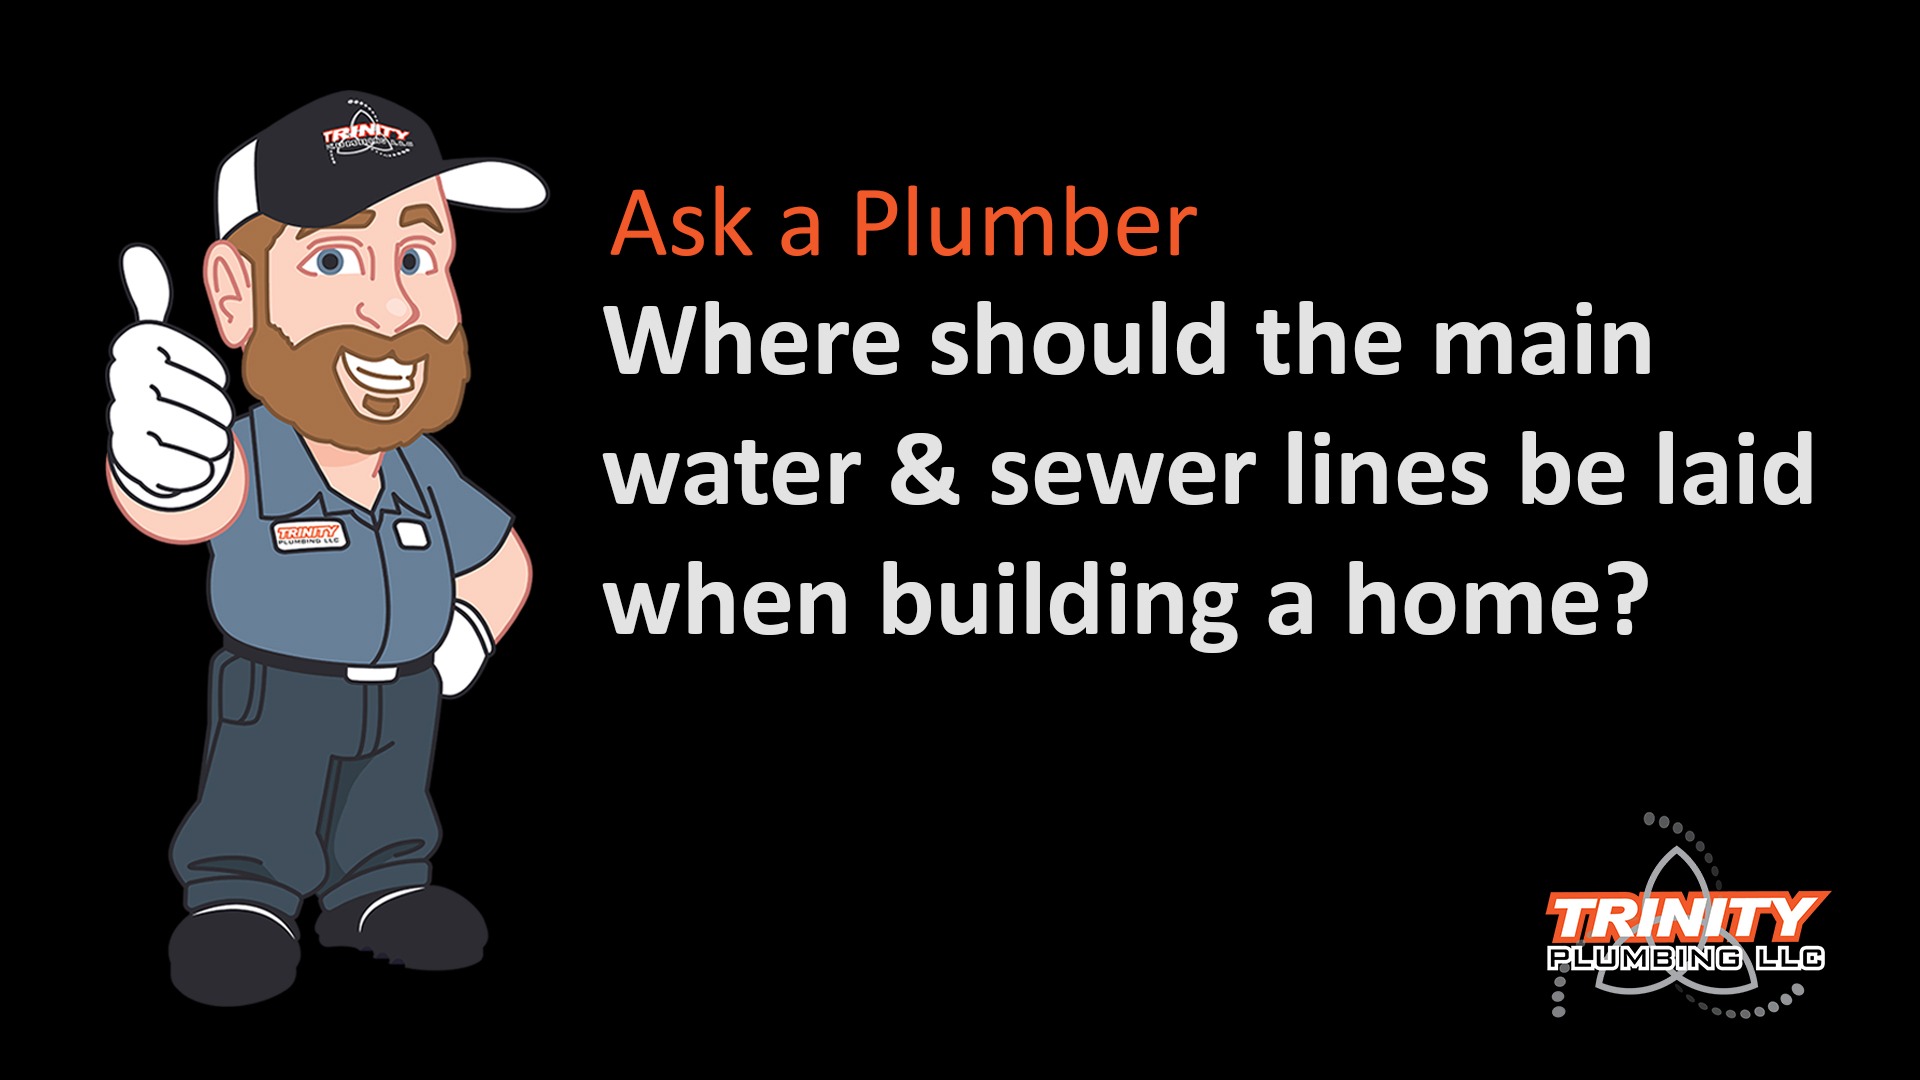 where should water sewer lines laid building new home plumber